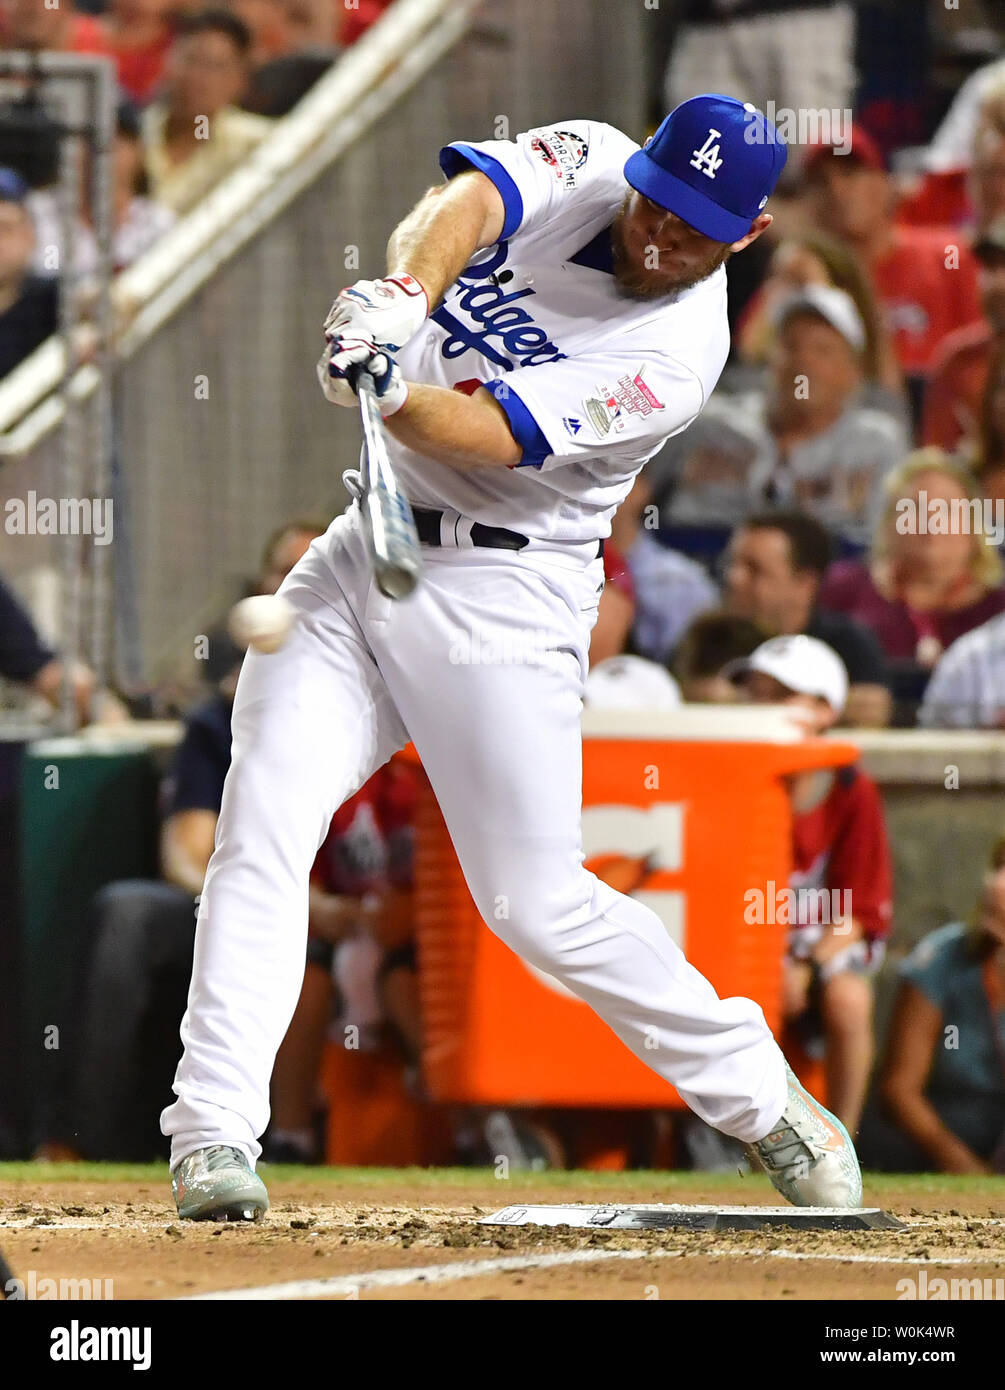 Los Angeles Dodgers Max Muncy of the National League bats in the 2018 Home  Run Derby during the All Star break at Nationals Park in Washington, D.C.  on July 16, 2018. Photo